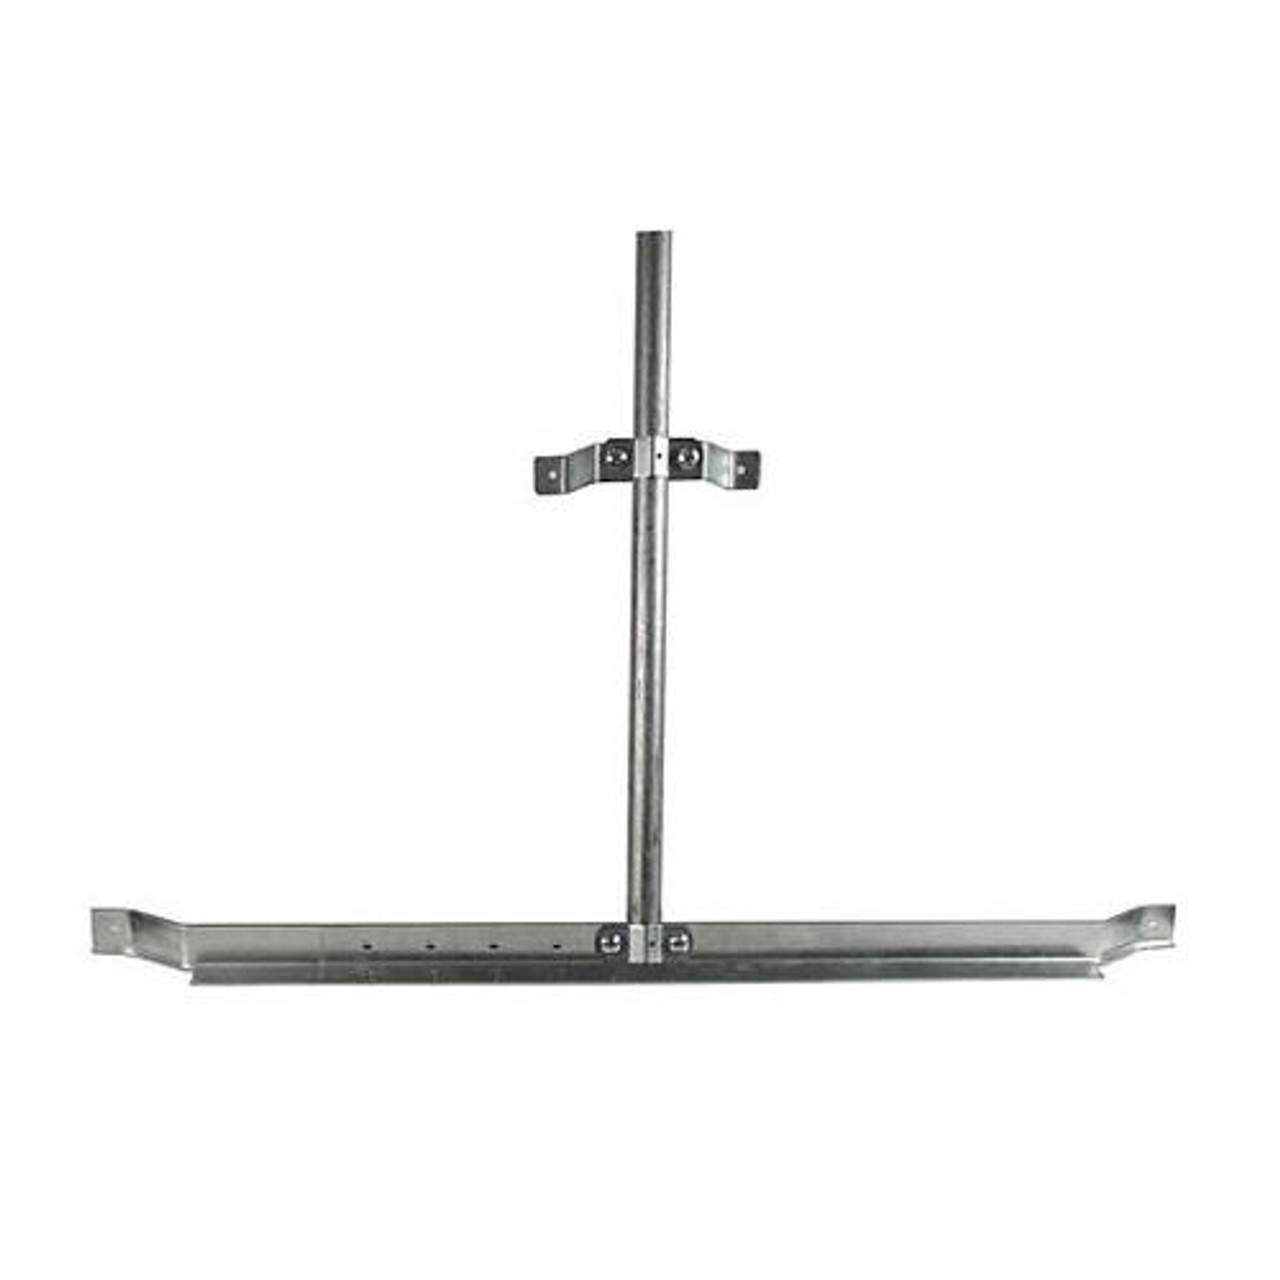 Eagle EZ 31 Antenna Mast Gable Eave Mount End Adjustable 45"-60" Inch 1 1/4" to 2" Inch O.D. 36 x 5 x 3 Satellite Gable End Antenna Heavy Duty Adjustable